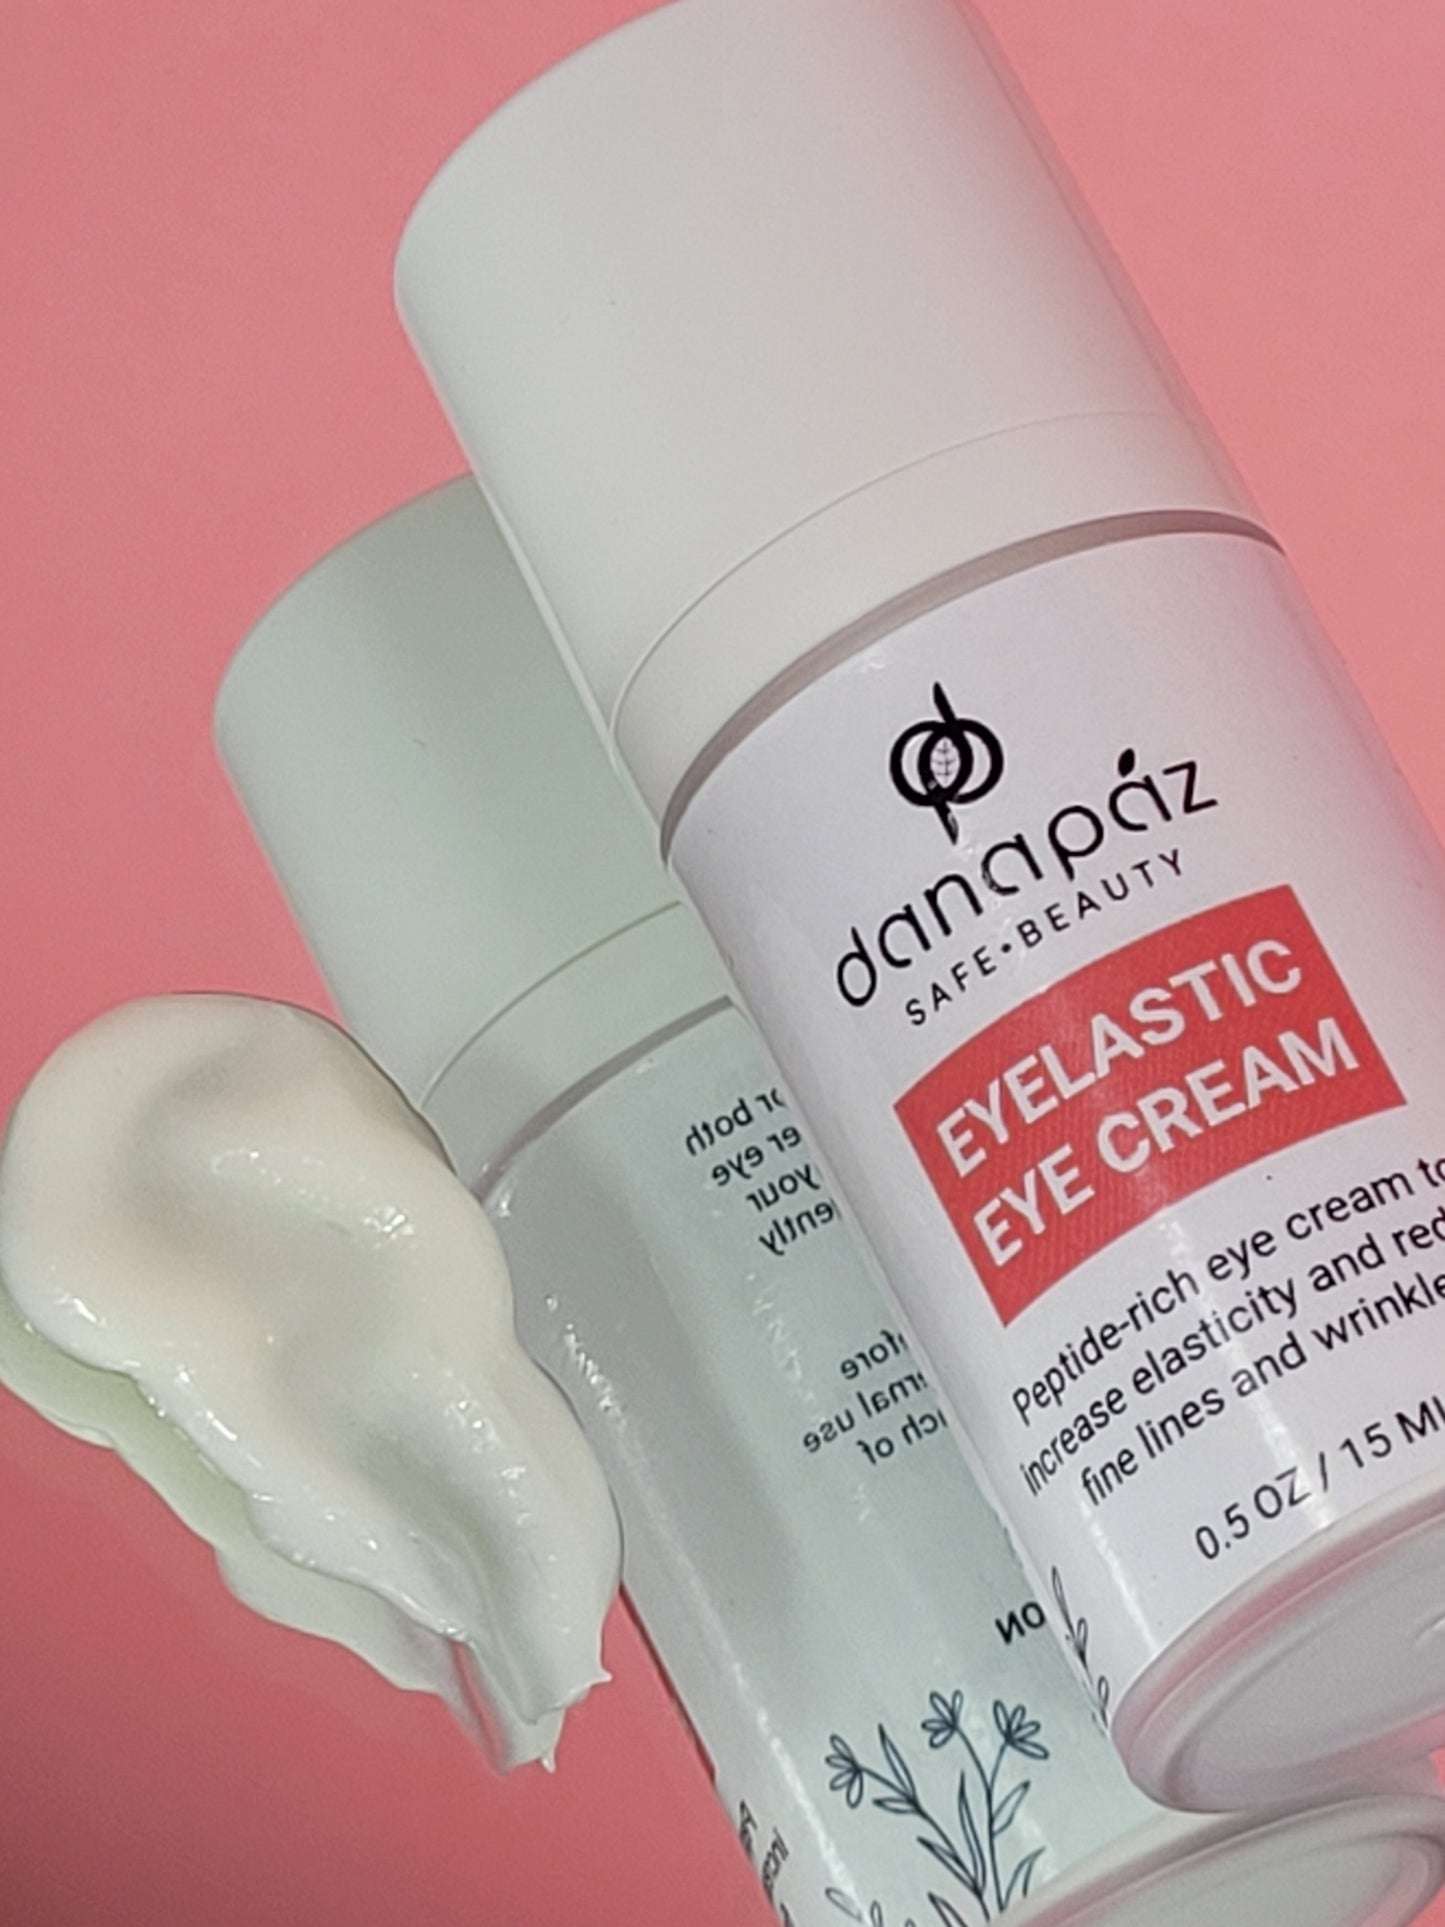 Shop for peptide-based skincare and anti-aging products from danapazbeauty.com. Find the best peptides for skin care, such as collagen, elastin, laminin, and more.